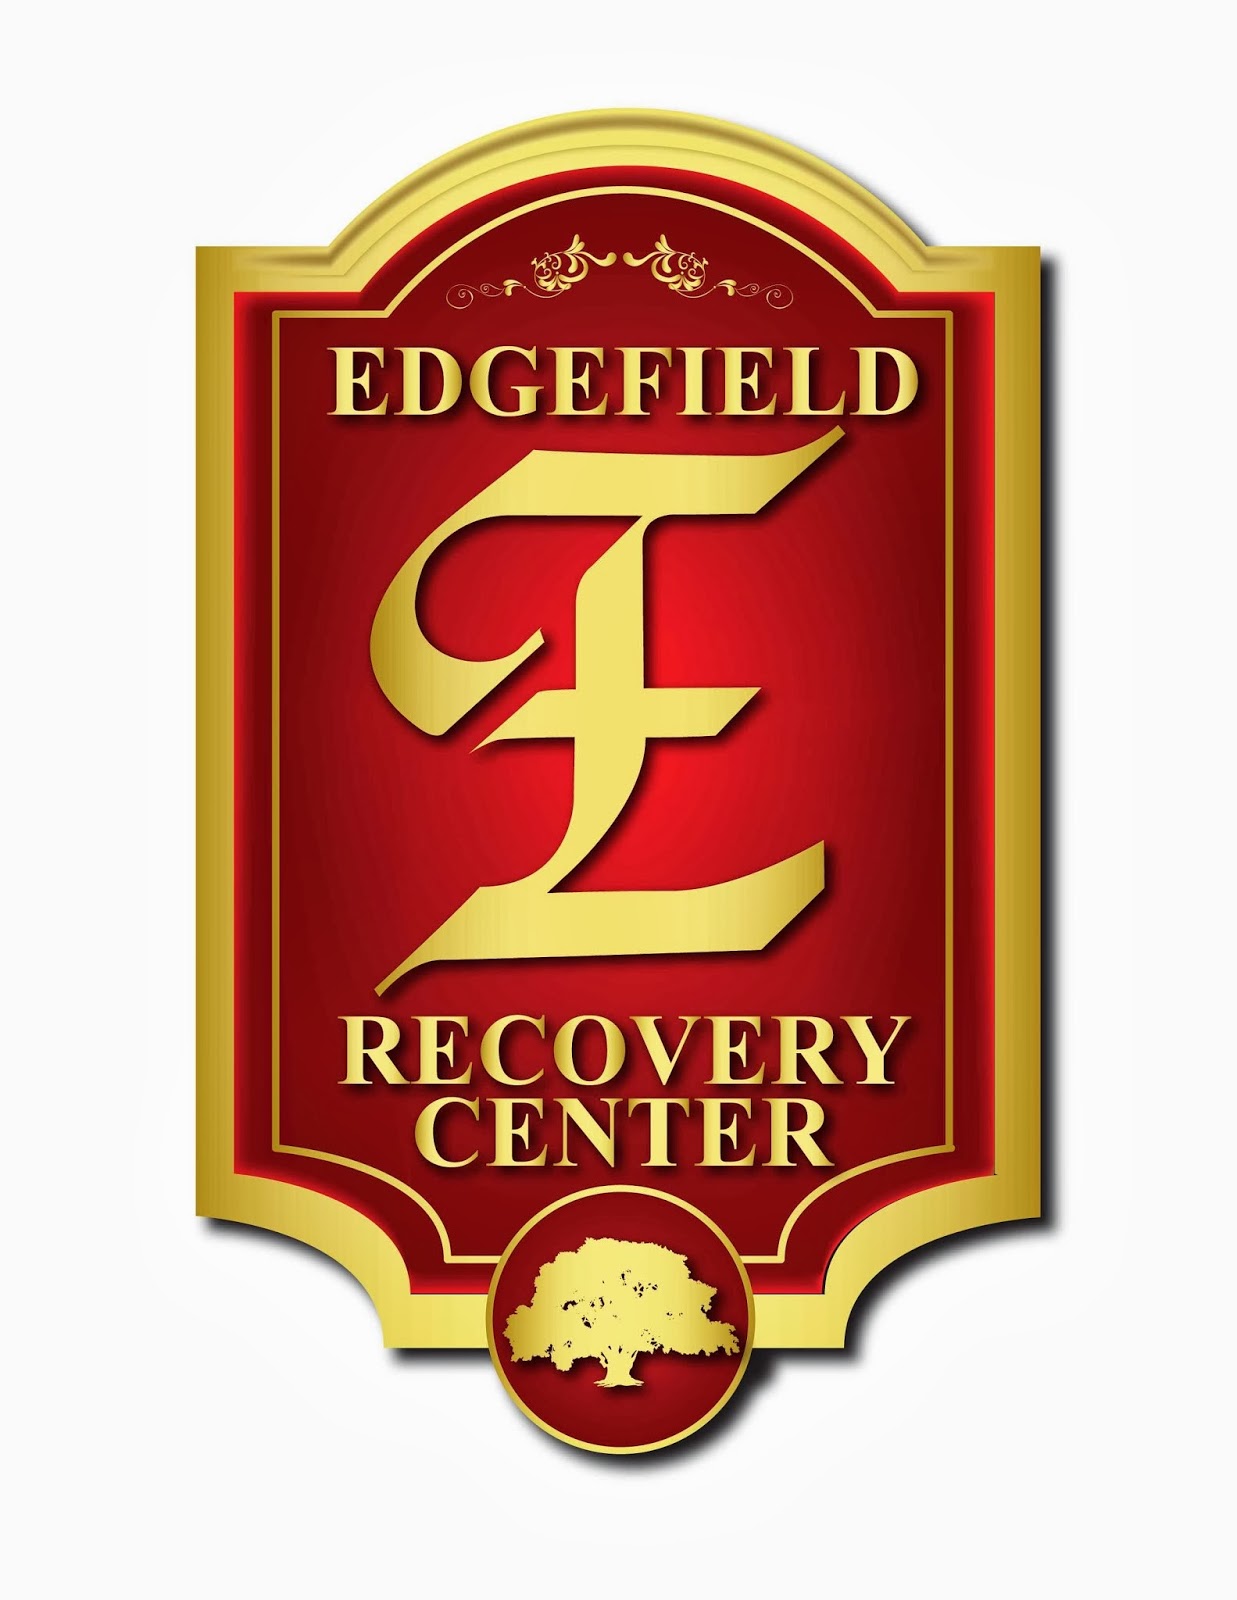 Edgefield - Outpatient Services